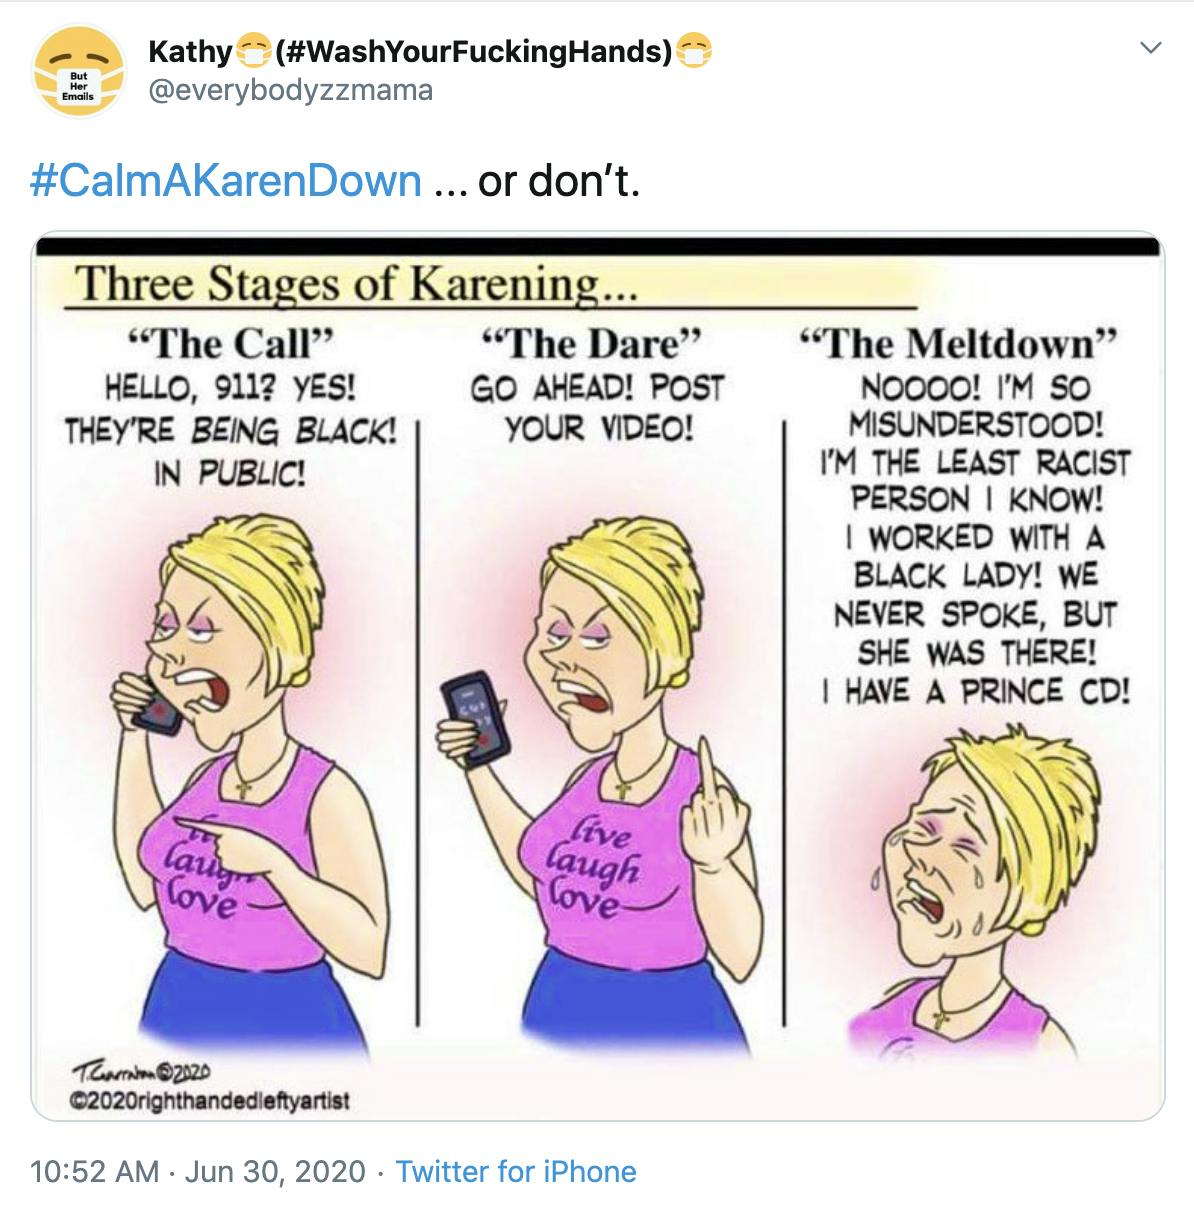 "#CalmAKarenDown ... or don’t." a cartoon drawing of Karen calling 911 on people for being black, then daring them to put it online, then crying at the response